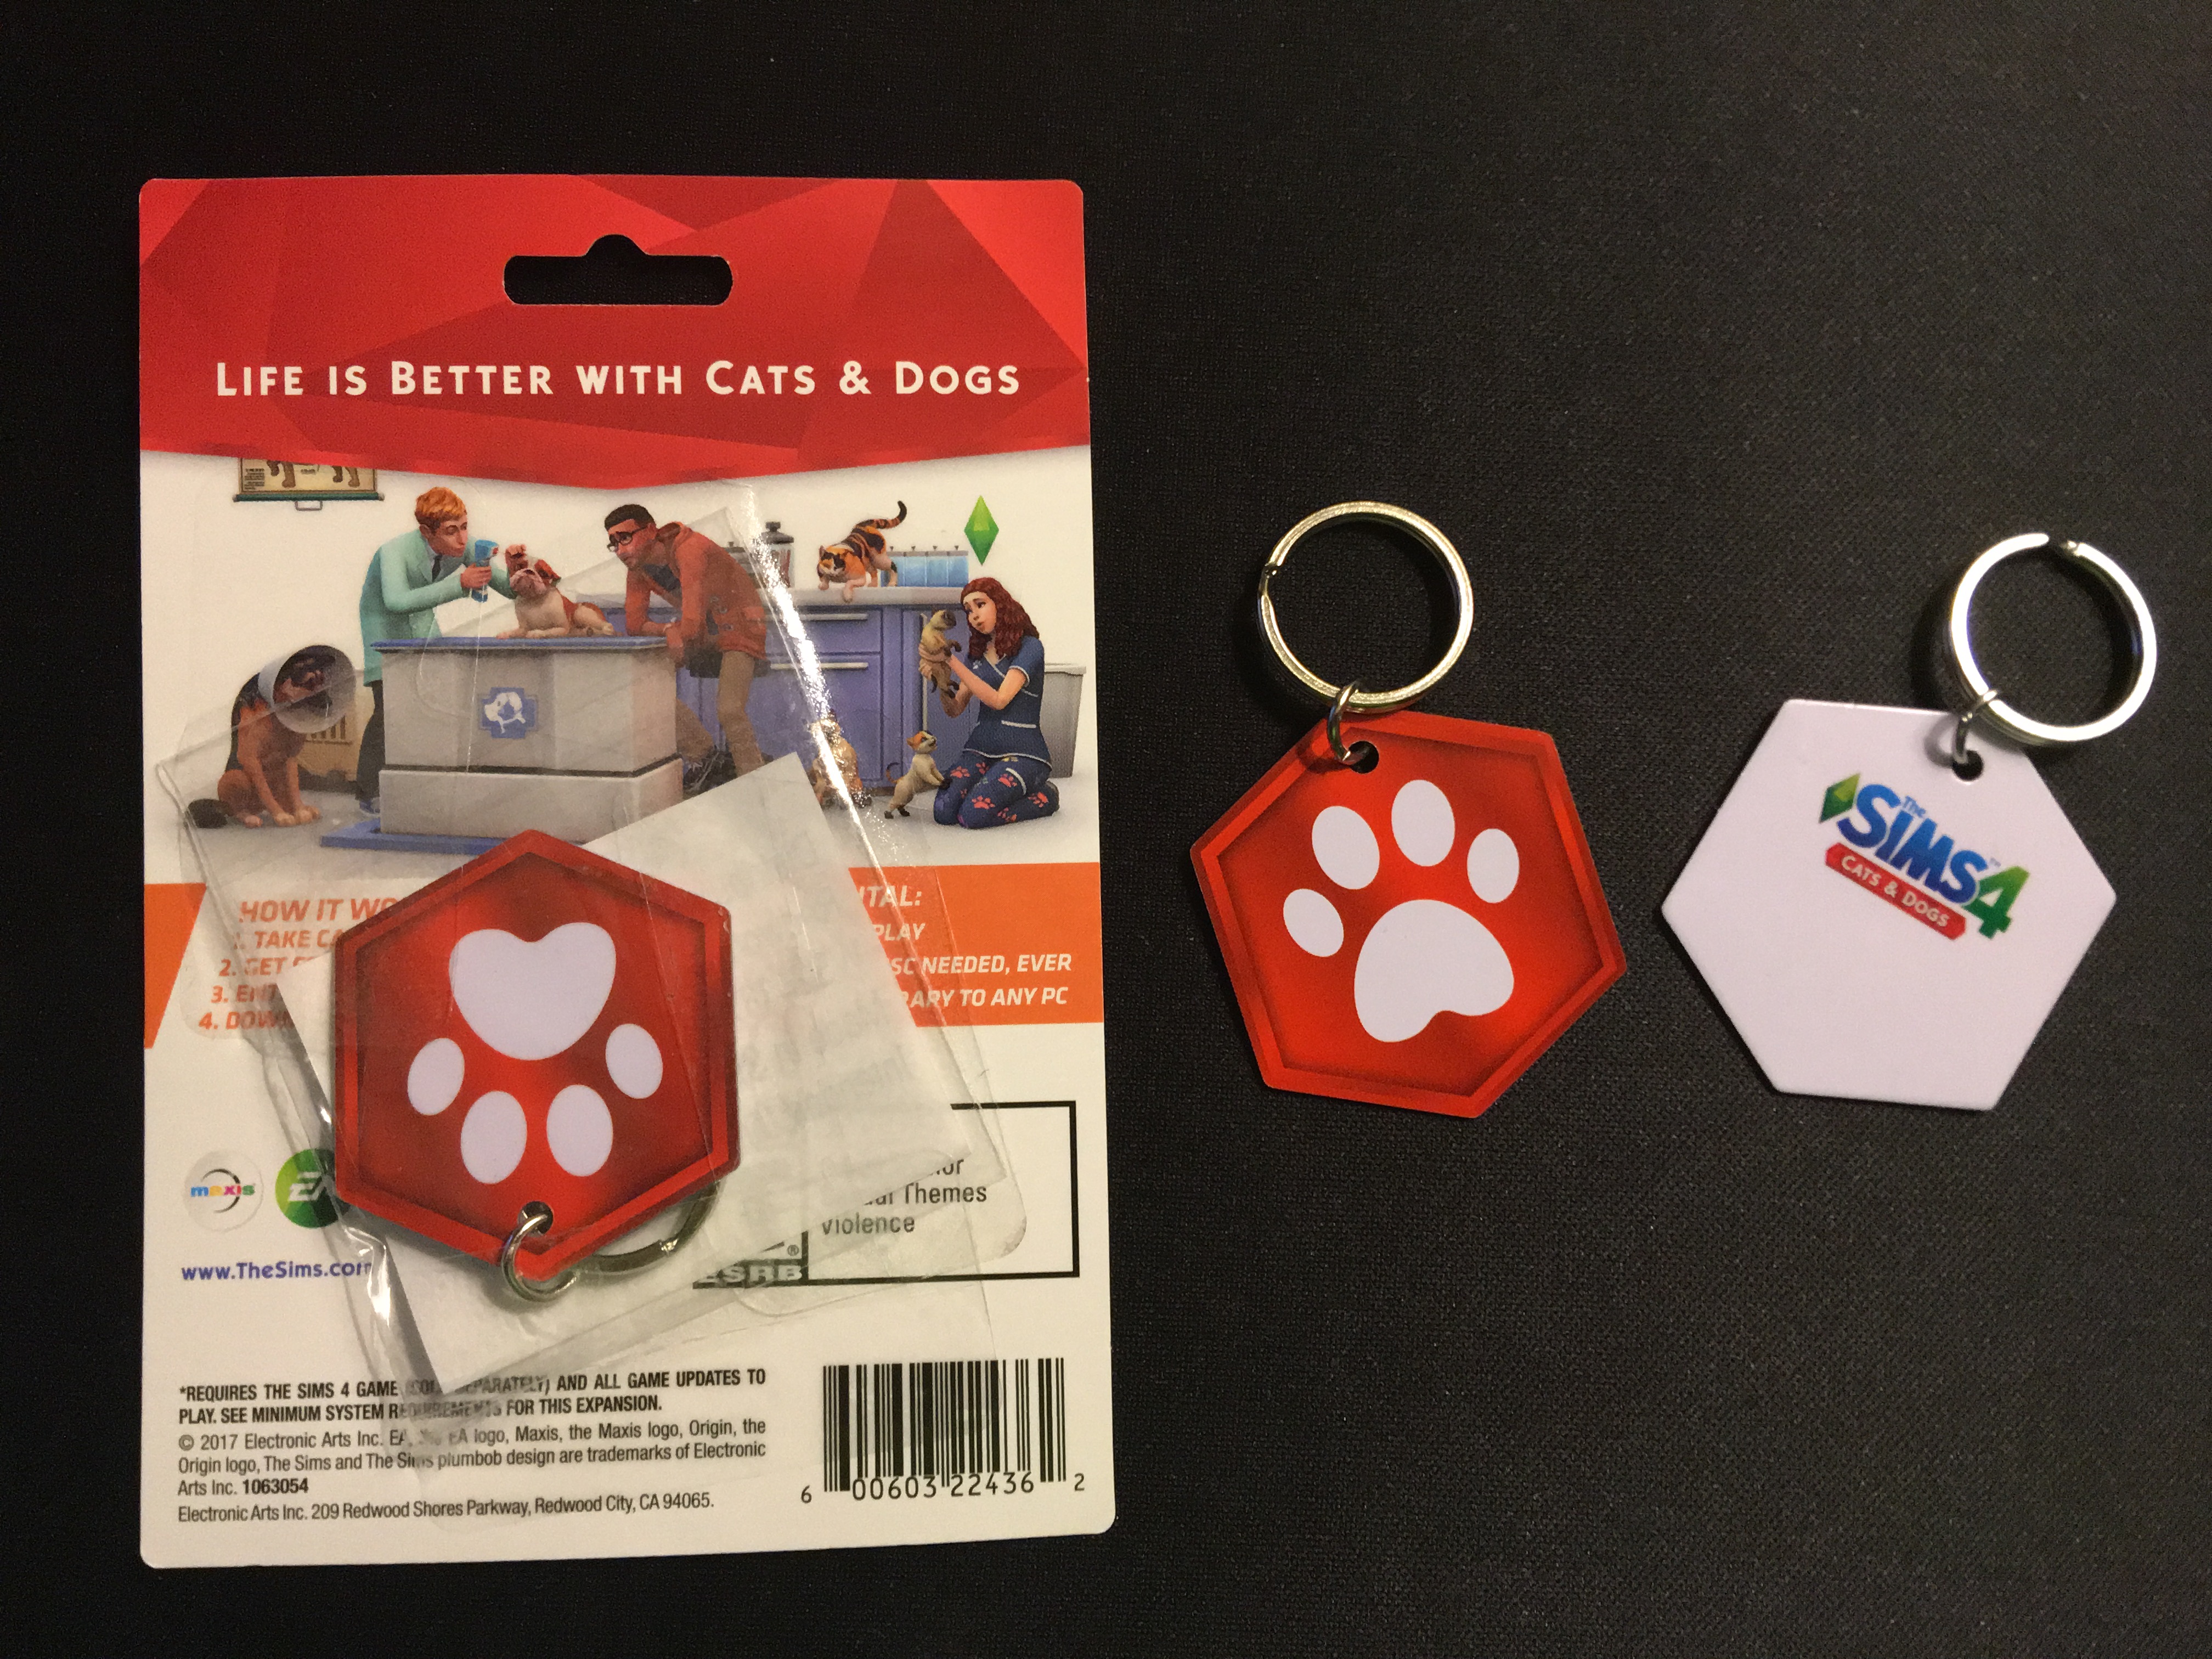 The Sims 4 Cats & Dogs: Check Out the Best Buy Exclusive ...